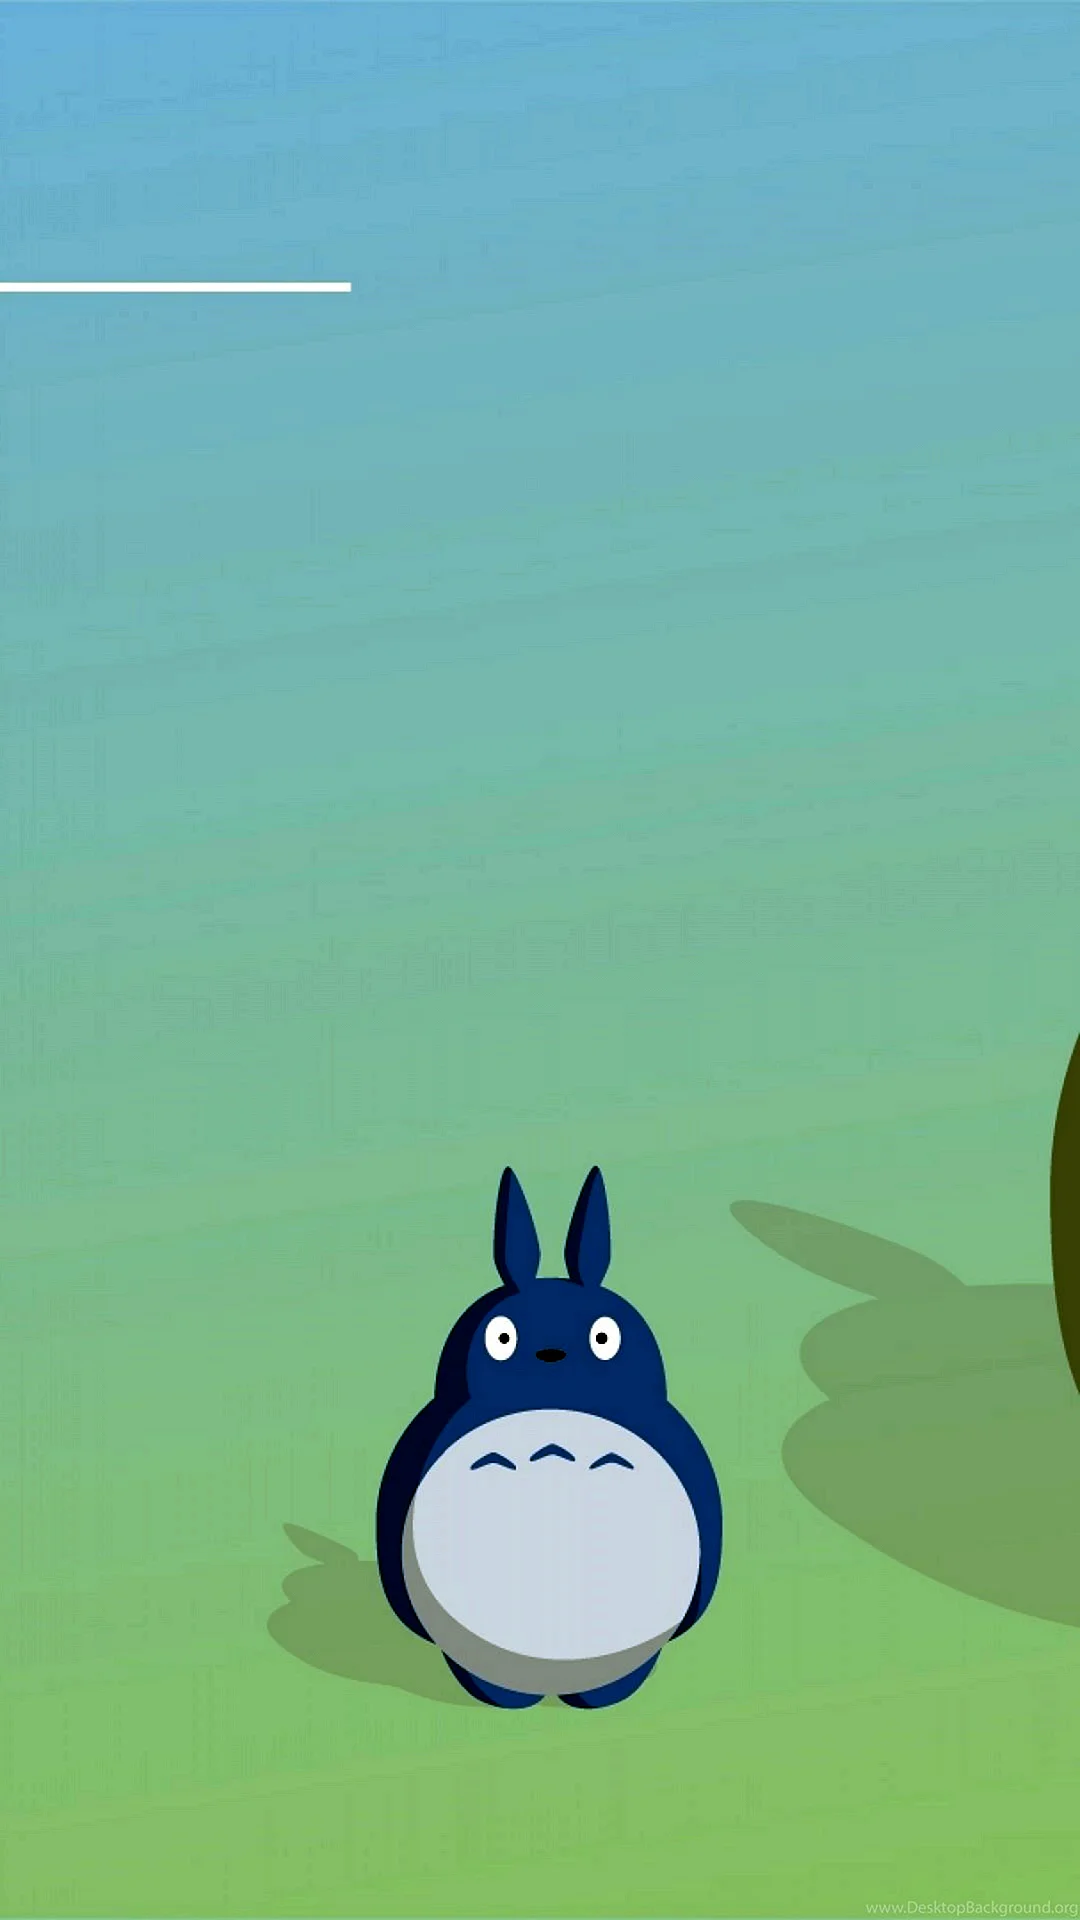 Totoro iPhone Wallpaper For iPhone